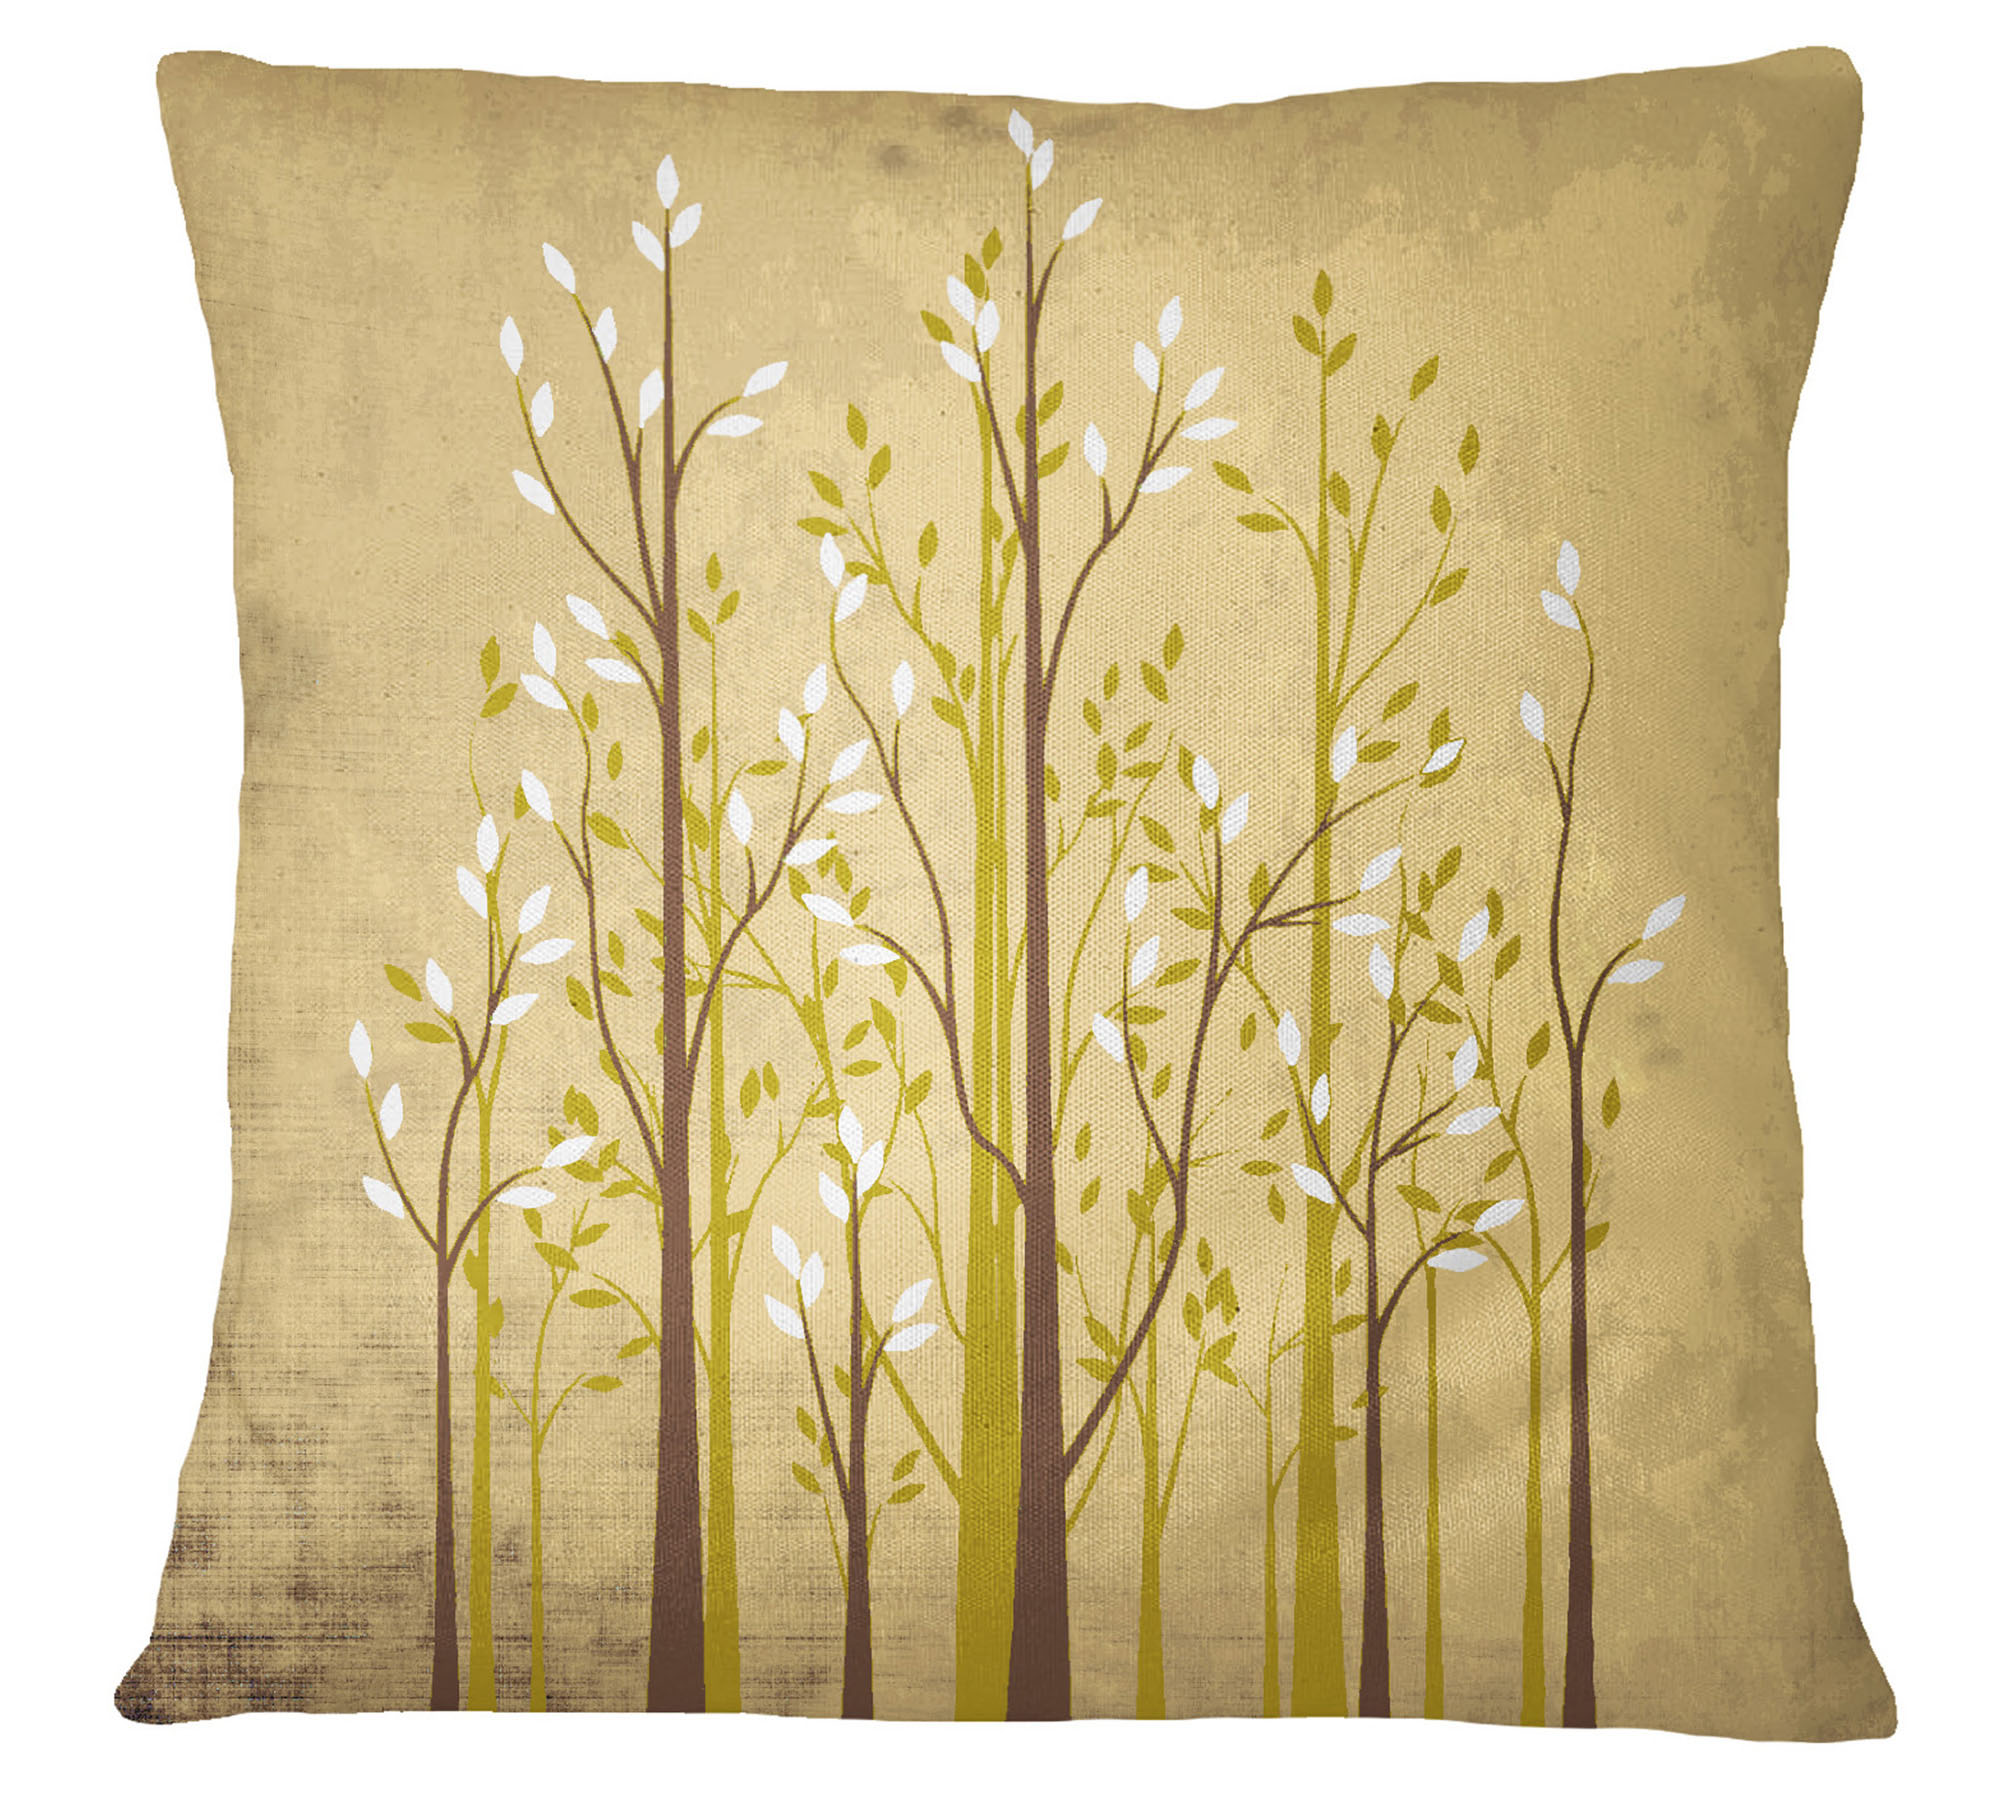 S4Sassy Square Cushion Cover Tree Print Beige Pillow Case Home Decor-An3 